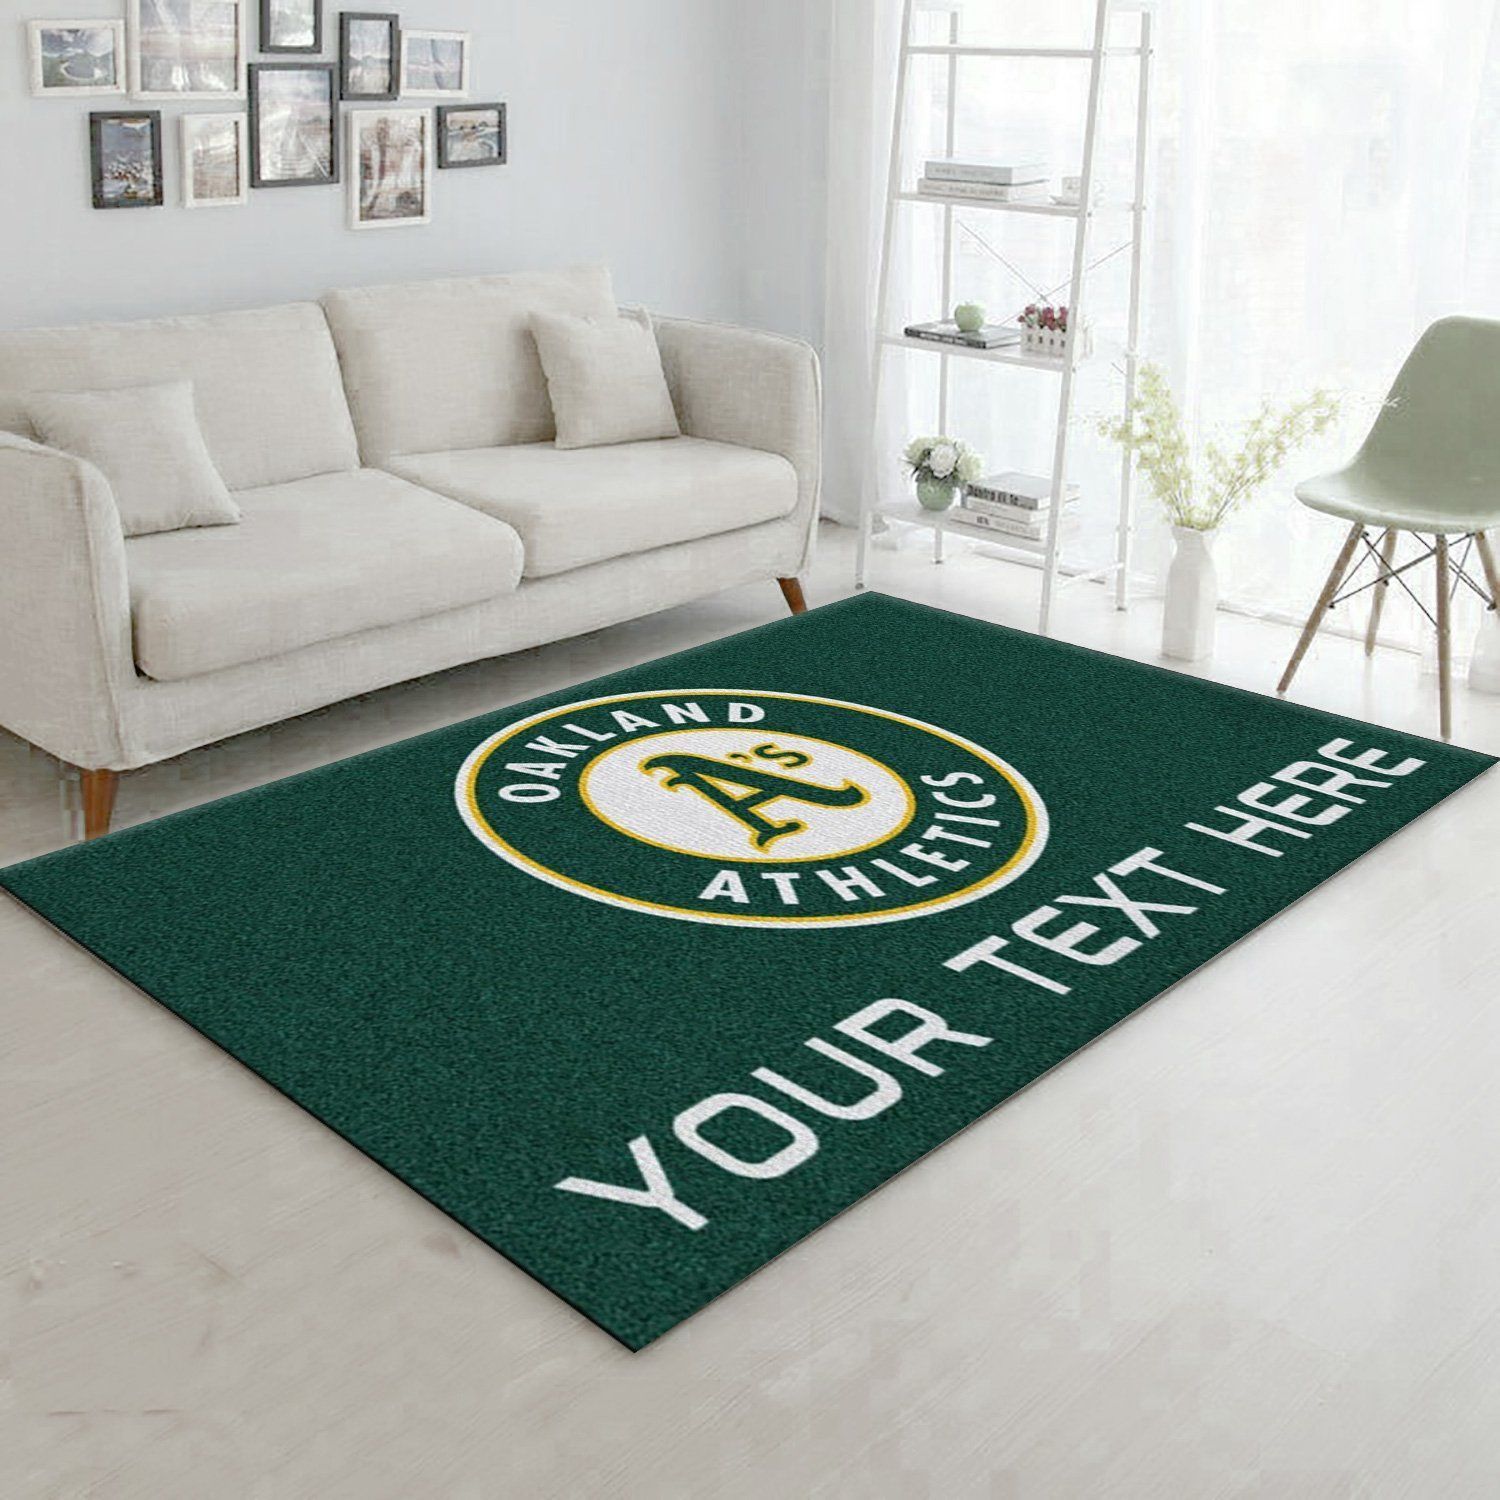 Customizable Oakland Athletics Personalized Accent Rug Area Rug Carpet, Kitchen Rug, Home US Decor - Indoor Outdoor Rugs 2